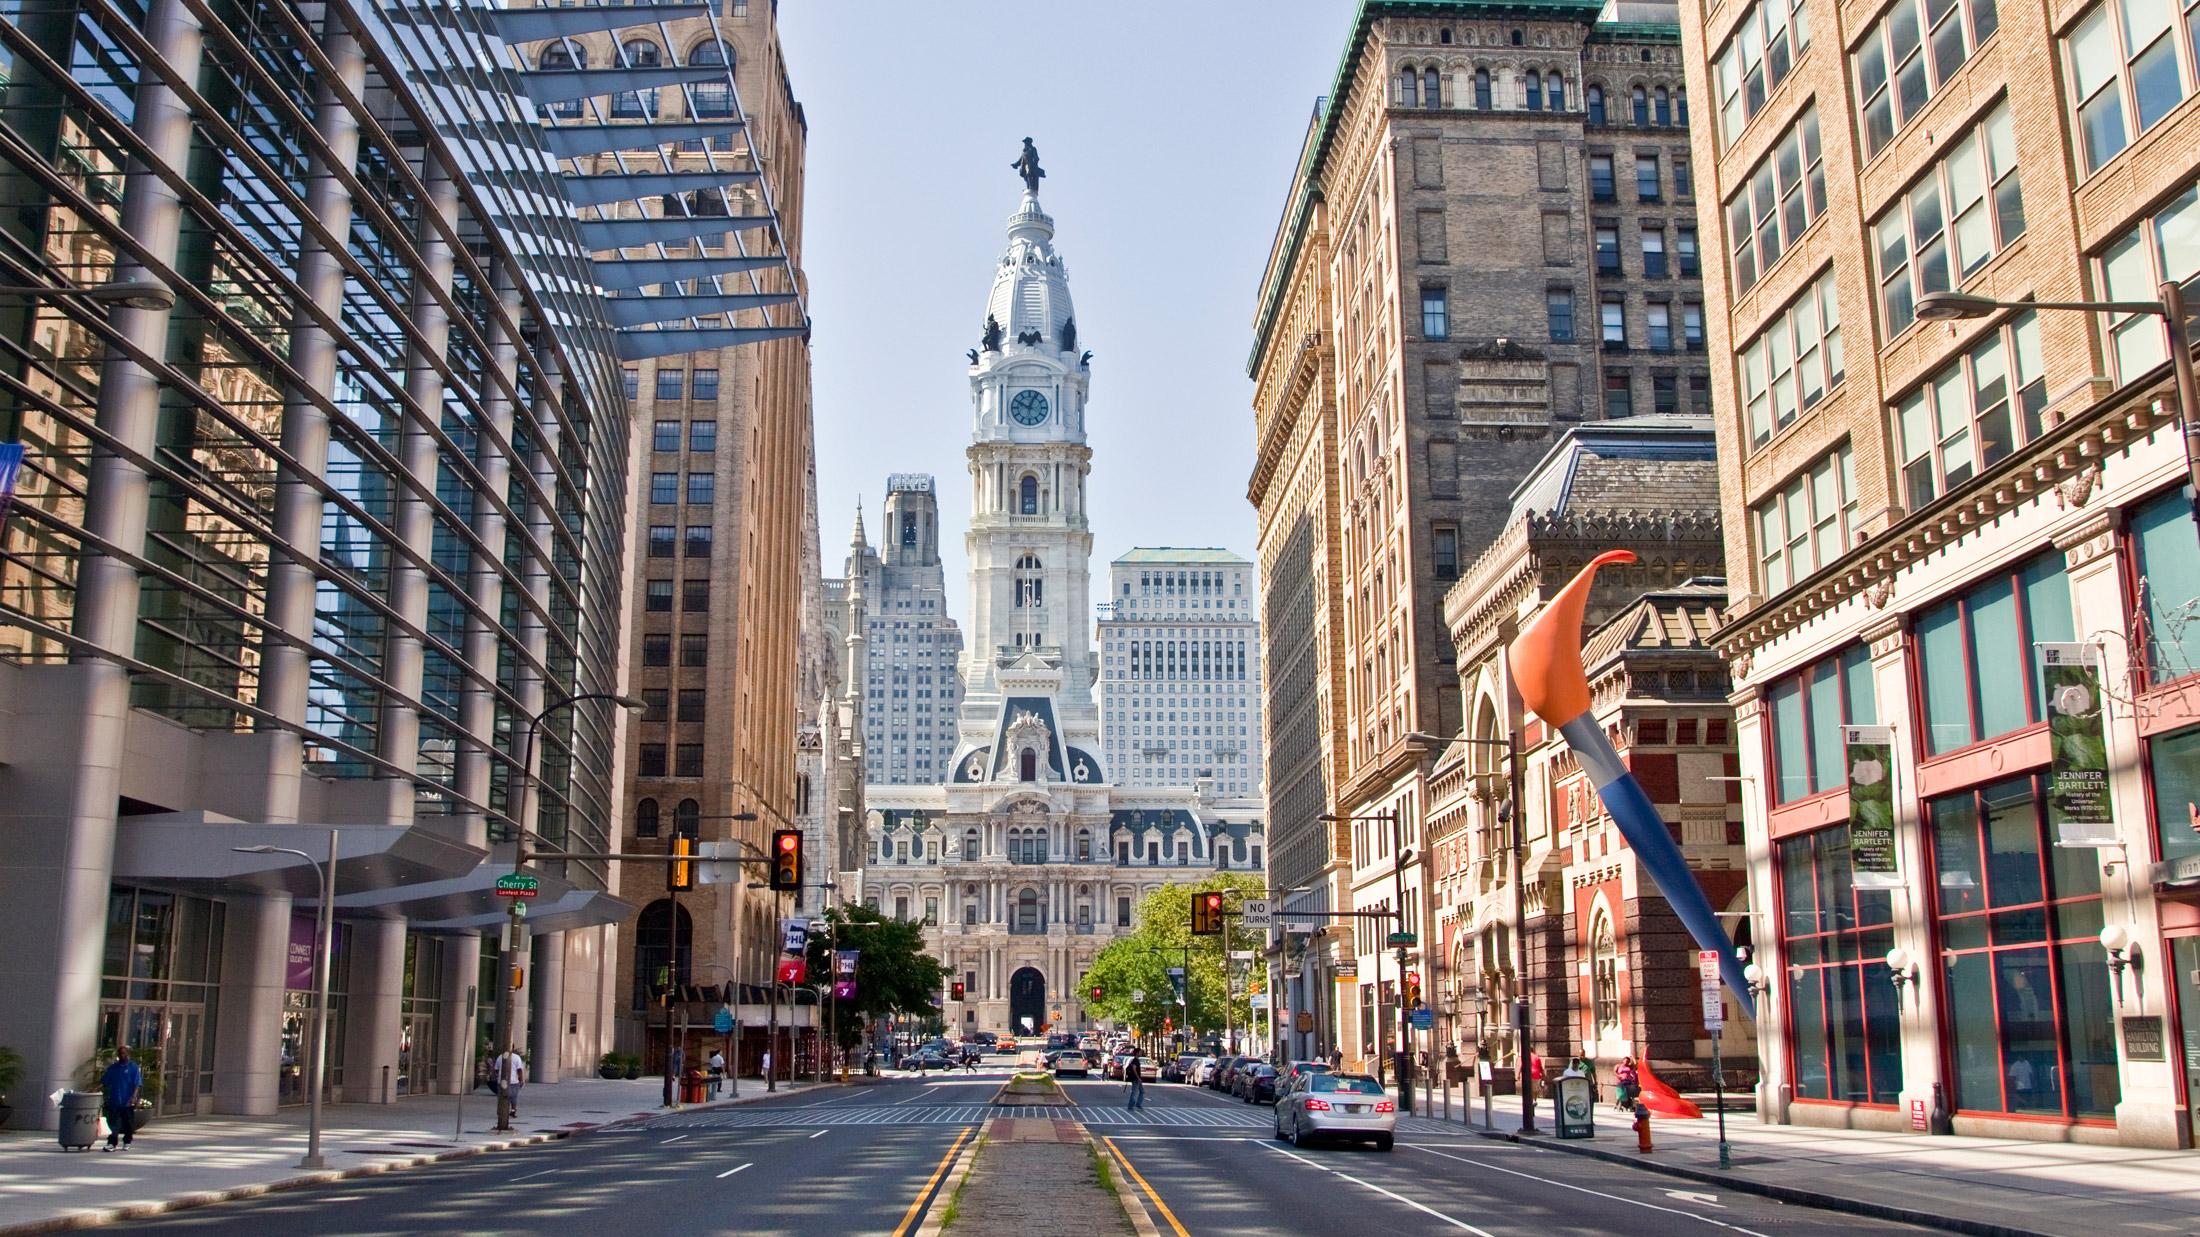 Cover image of this place Philadelphia City Hall